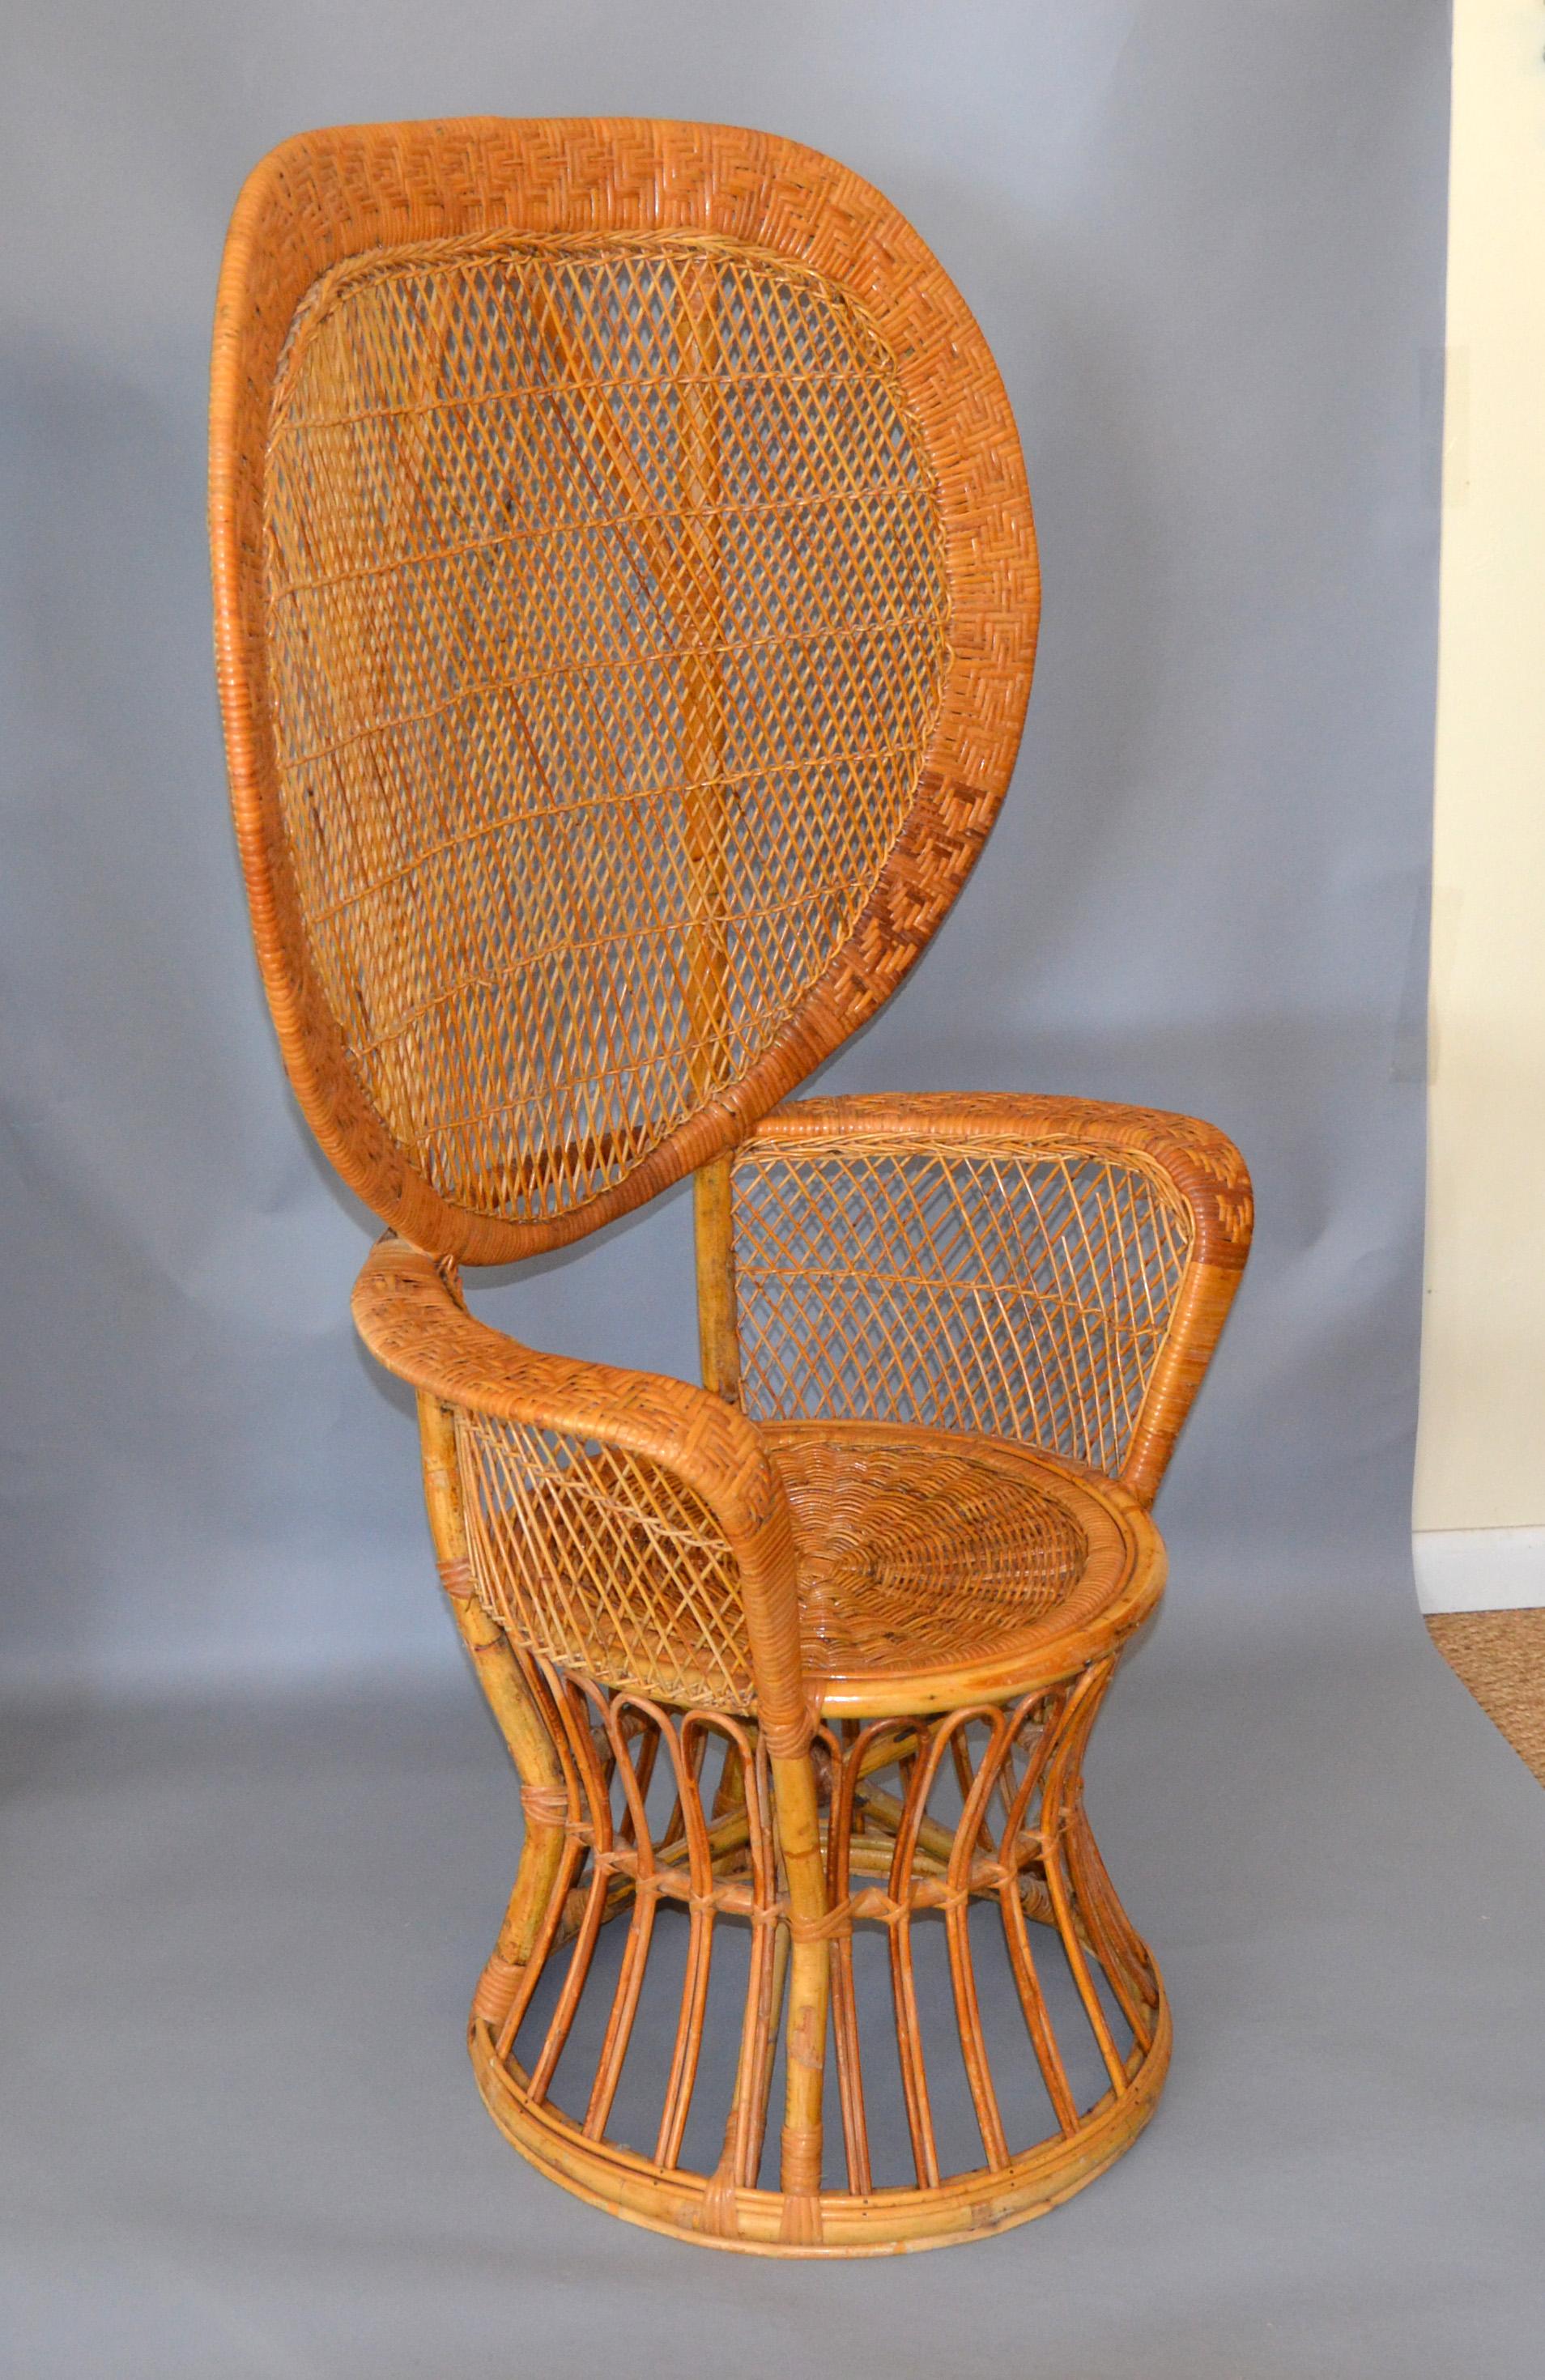 Bohemian chic stunning handwoven vintage peacock high back chair from the 1960s.
Please note the details and different techniques in this chair.
Made out of wicker, rattan and reed.
Great for indoor and outdoor use.